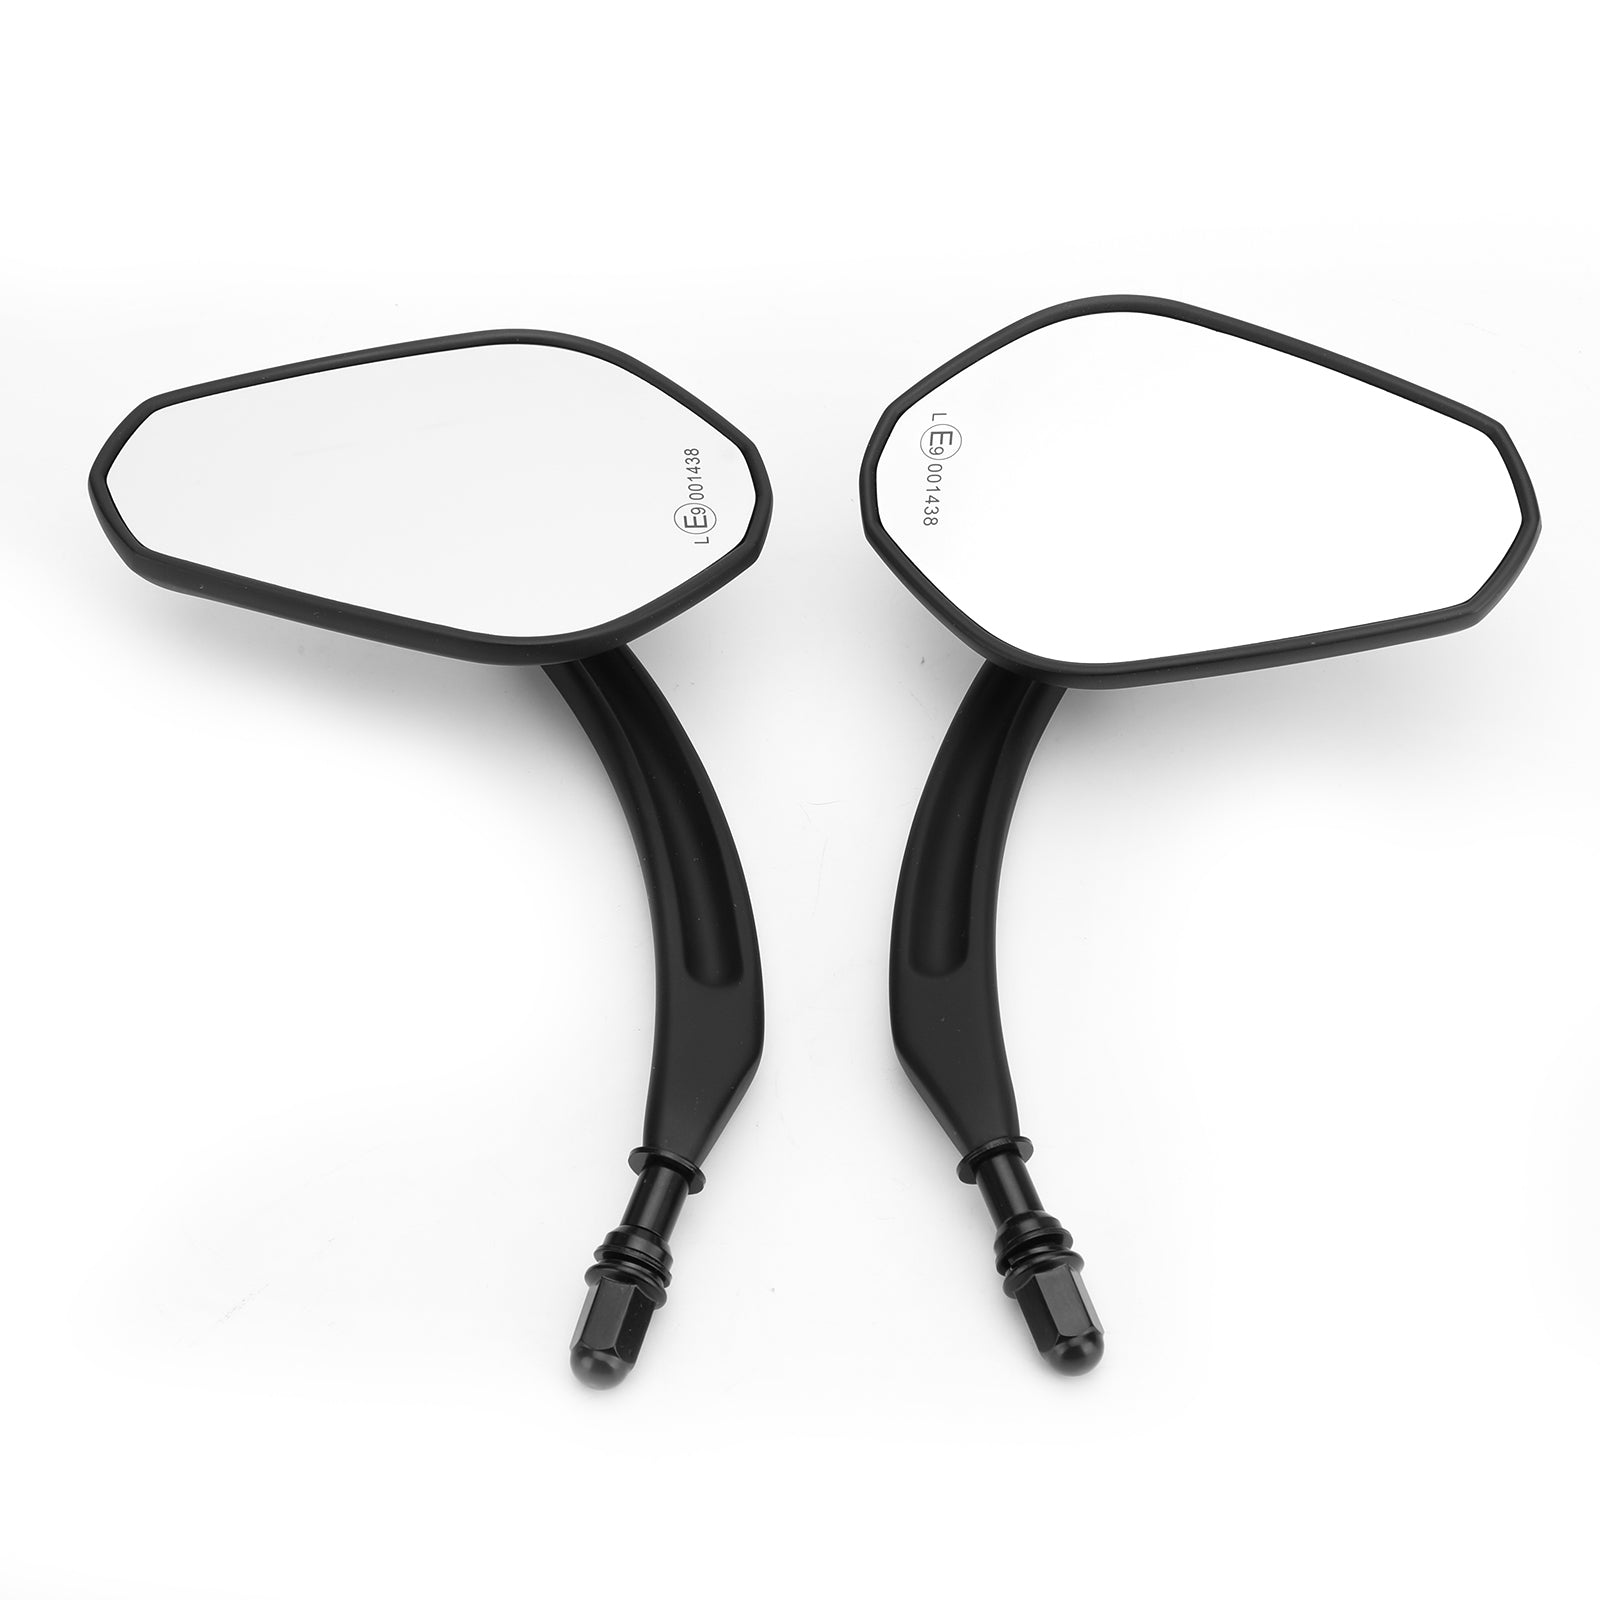 Black Diamond Rear View Mirrors Motorcycle For Cruiser Touring Chopper Sportster Generic